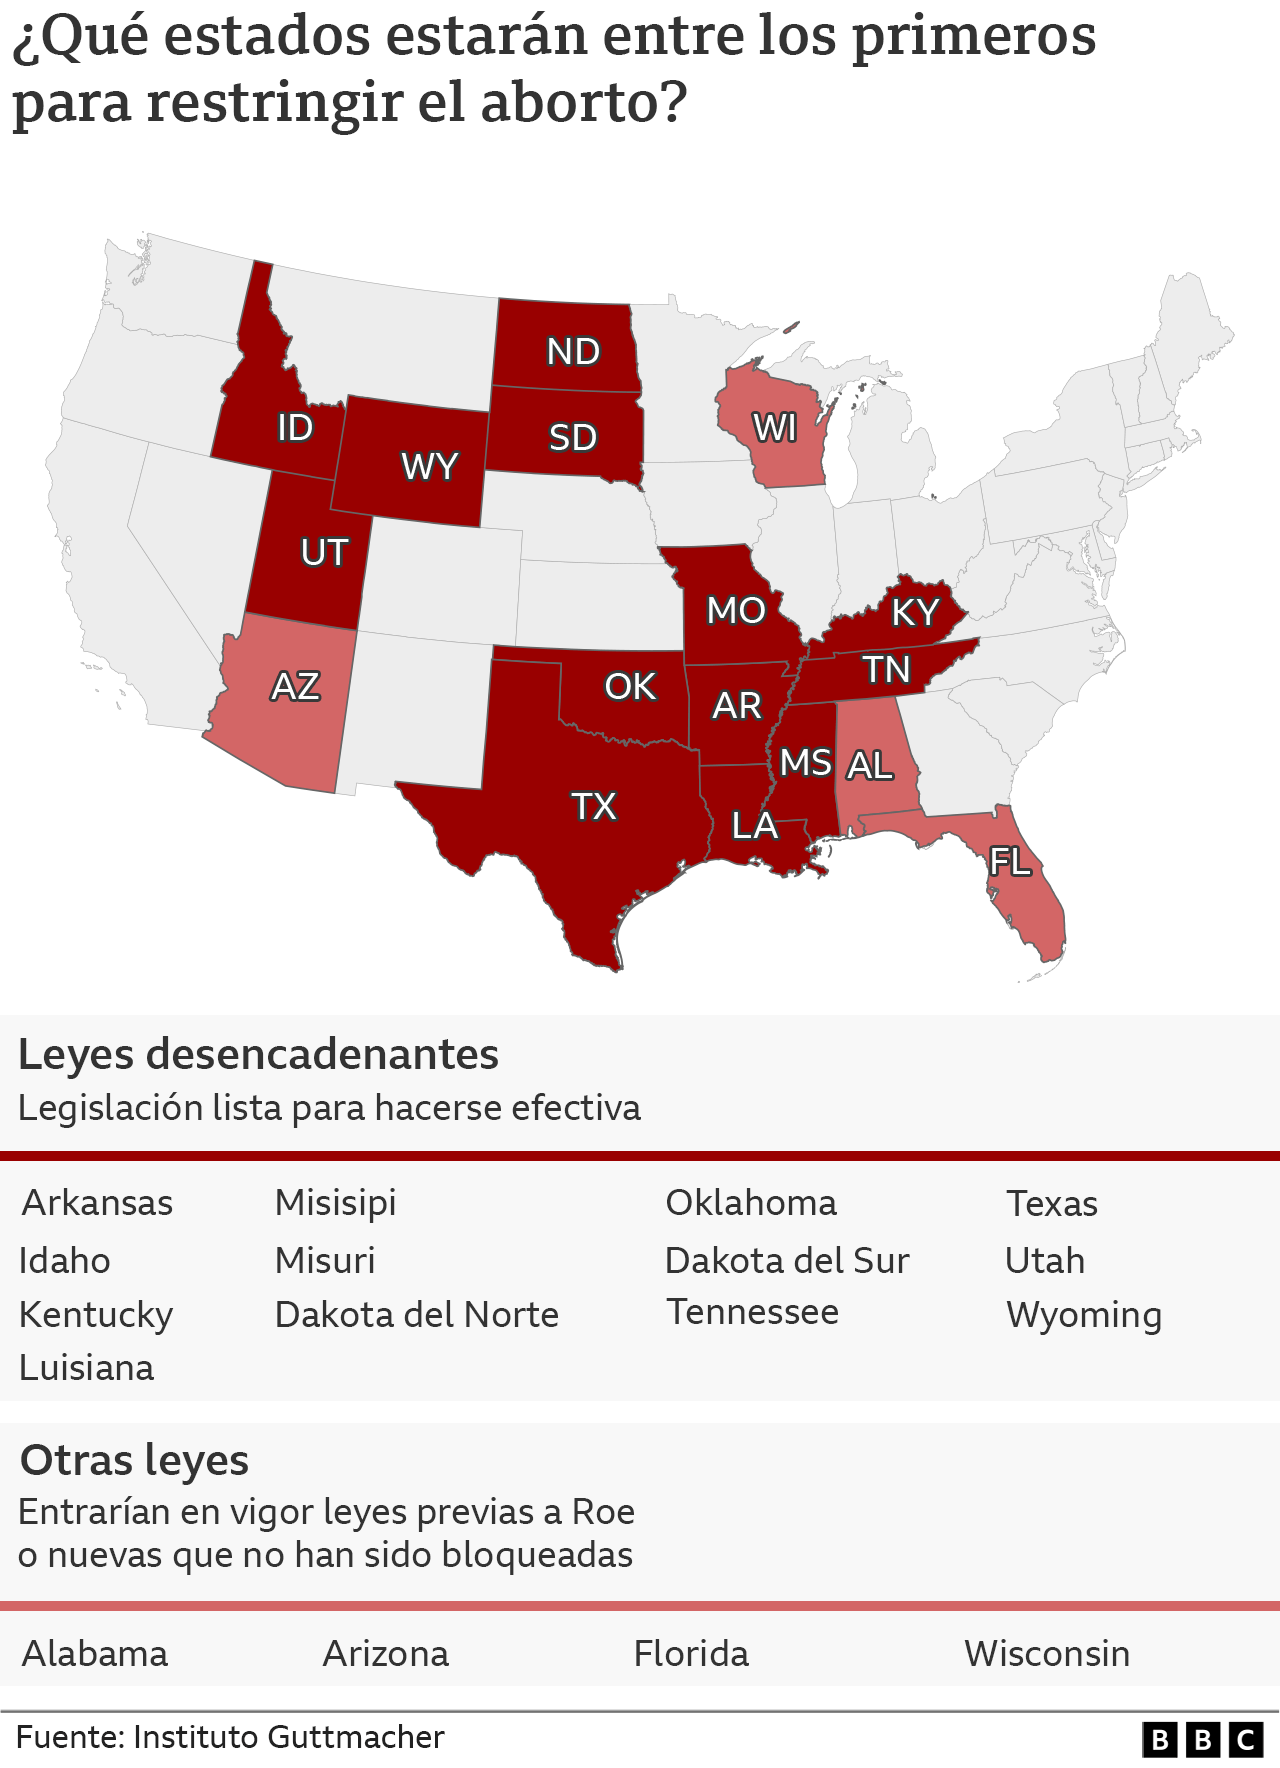 Map states United States with trigger laws, activation or triggers to restrict abortion.